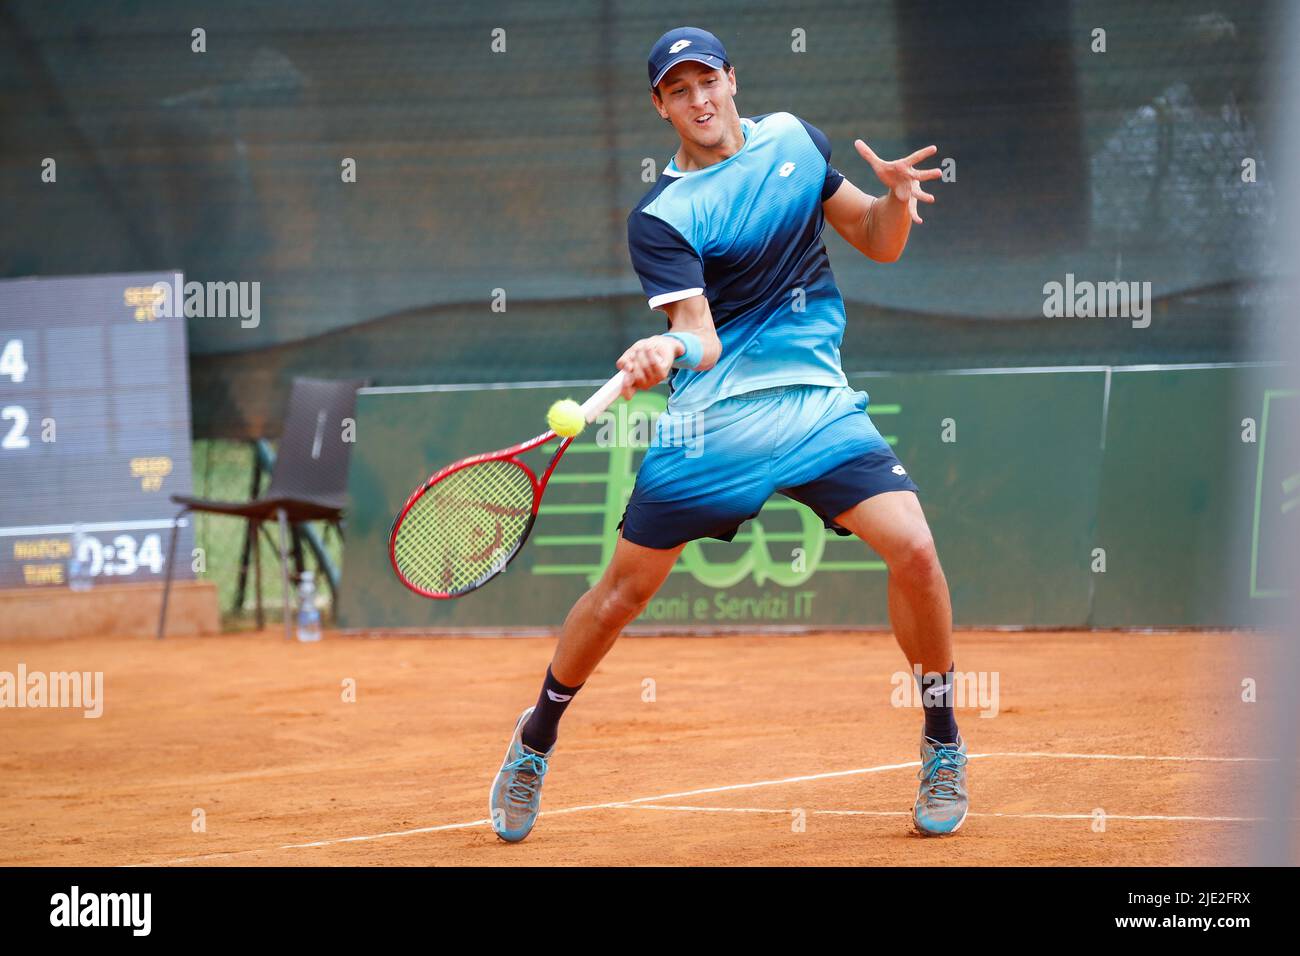 Milan, Italy. 24th June, 2022. Luciano Darderi during 2022 Atp Challenger  Milano - Aspria Tennis Cup, Tennis Internationals in Milan, Italy, June 24  2022 Credit: Independent Photo Agency/Alamy Live News Stock Photo - Alamy